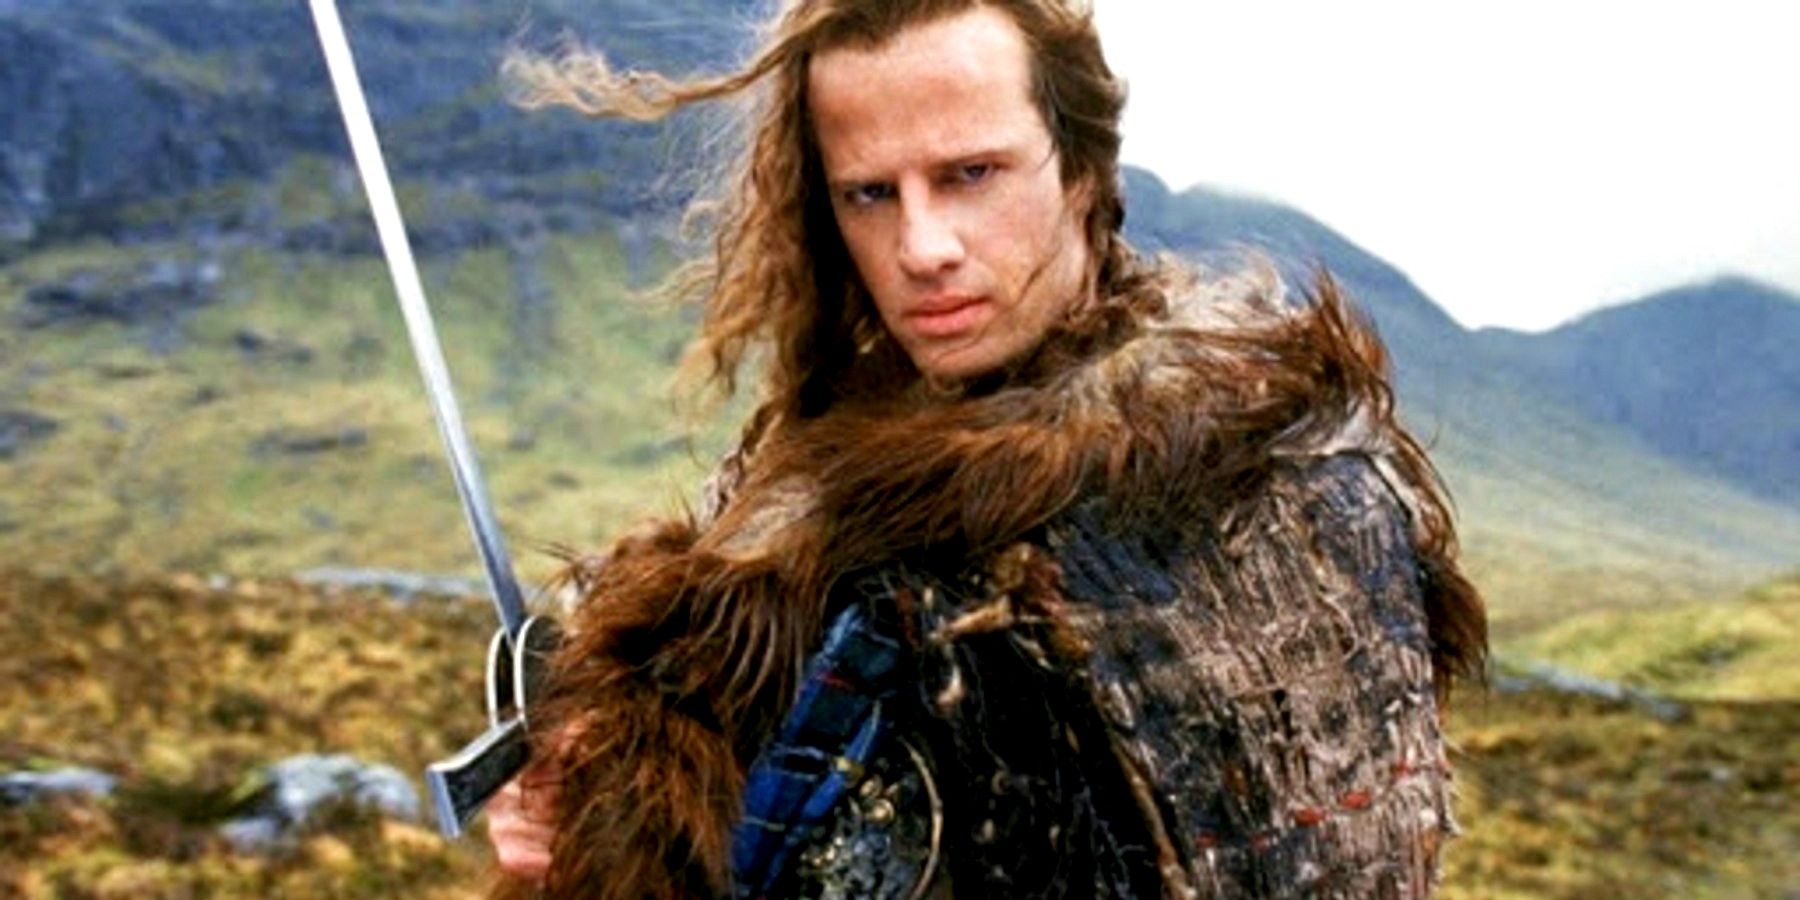 Christopher Lambert holding a sword on a mountain in Highlander